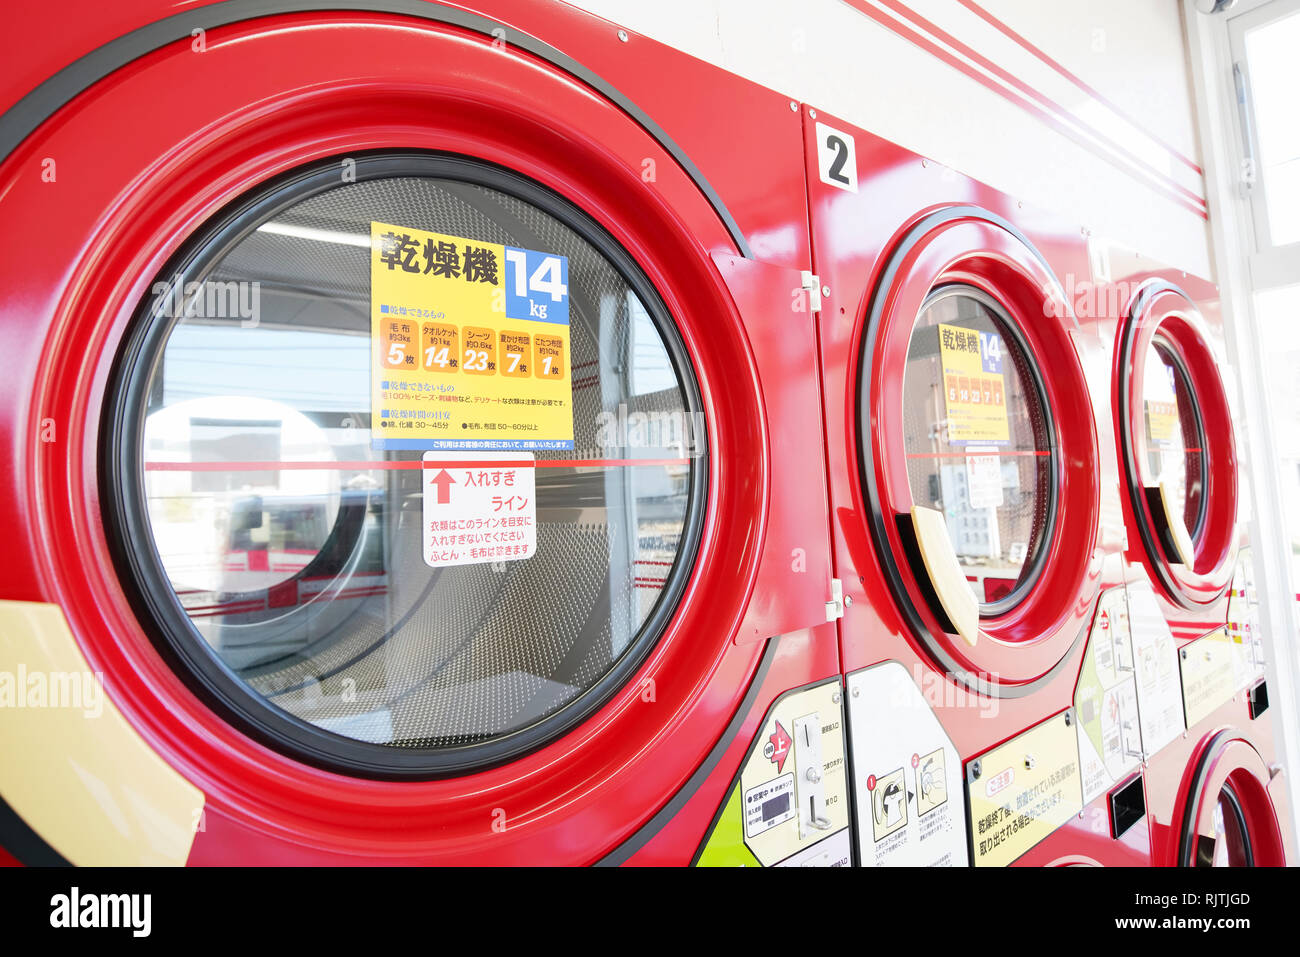 Row of industrial laundry machines in a public laundromat Stock Photo